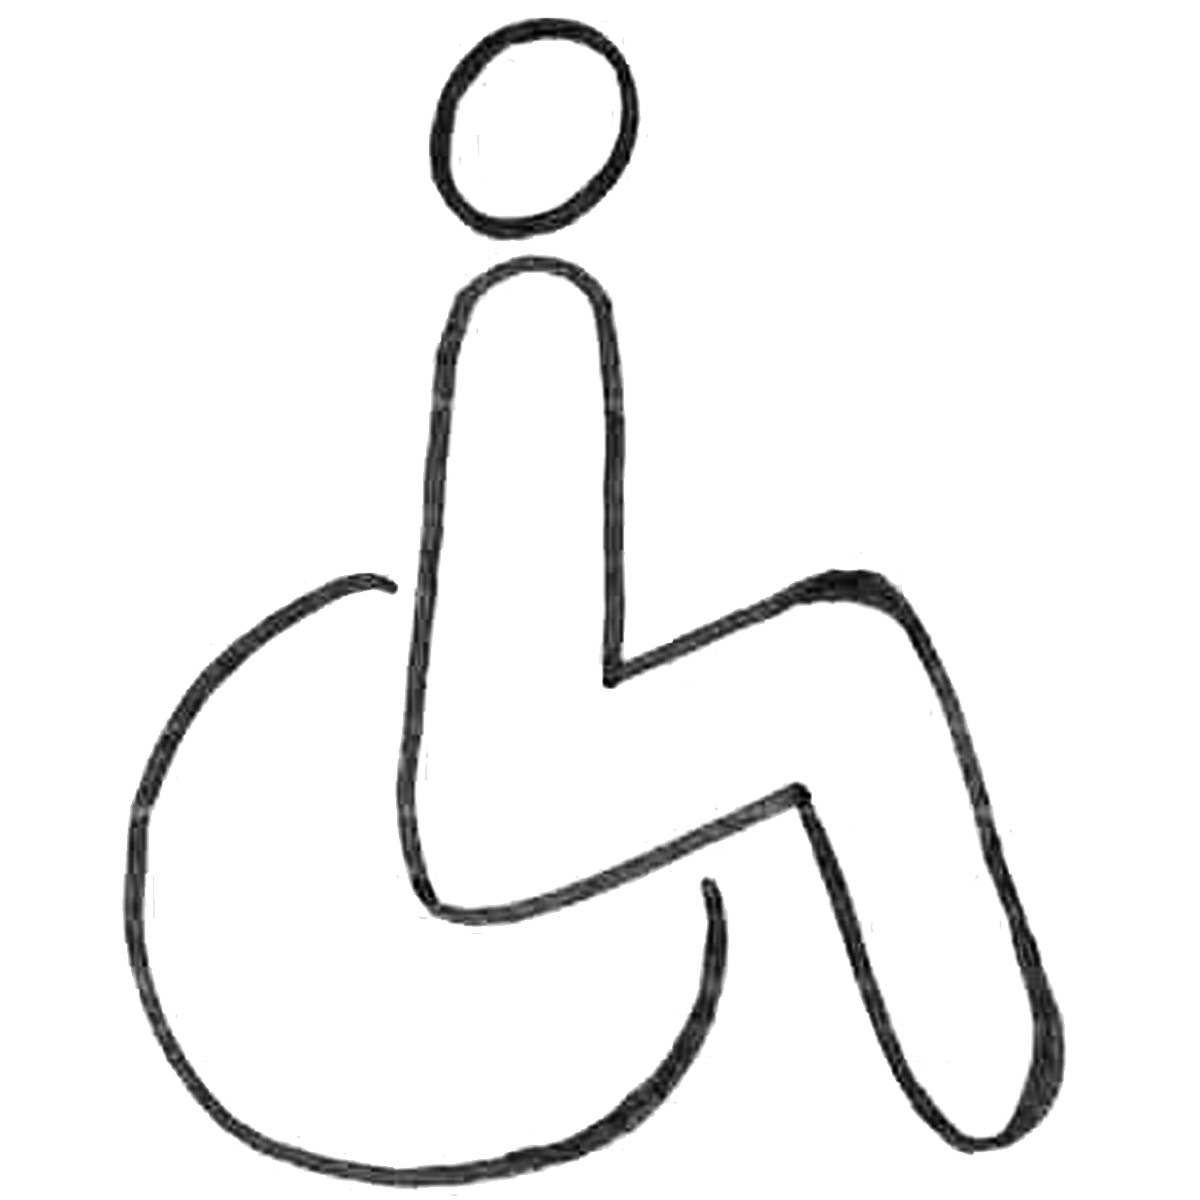 Access to persons with restricted mobility